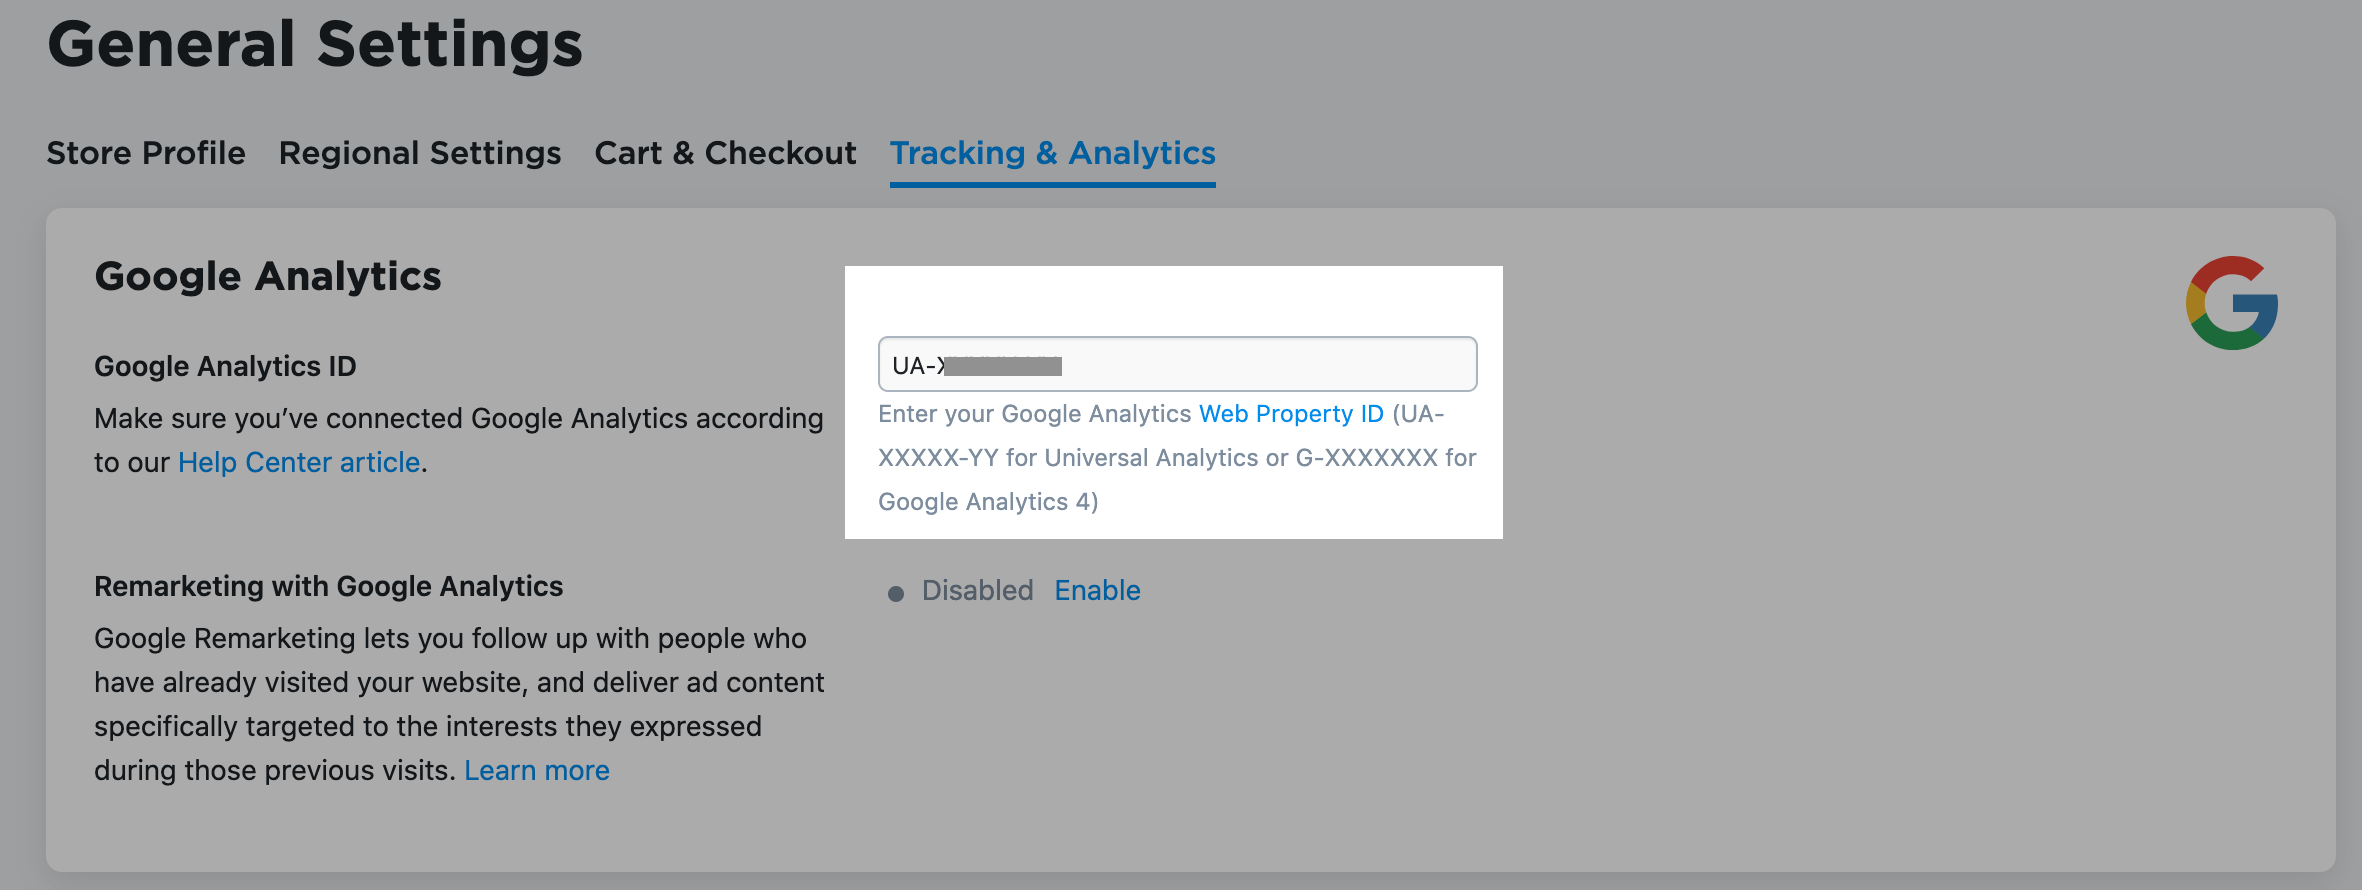 Enabling_Google_Analytics_for_store__7_.png